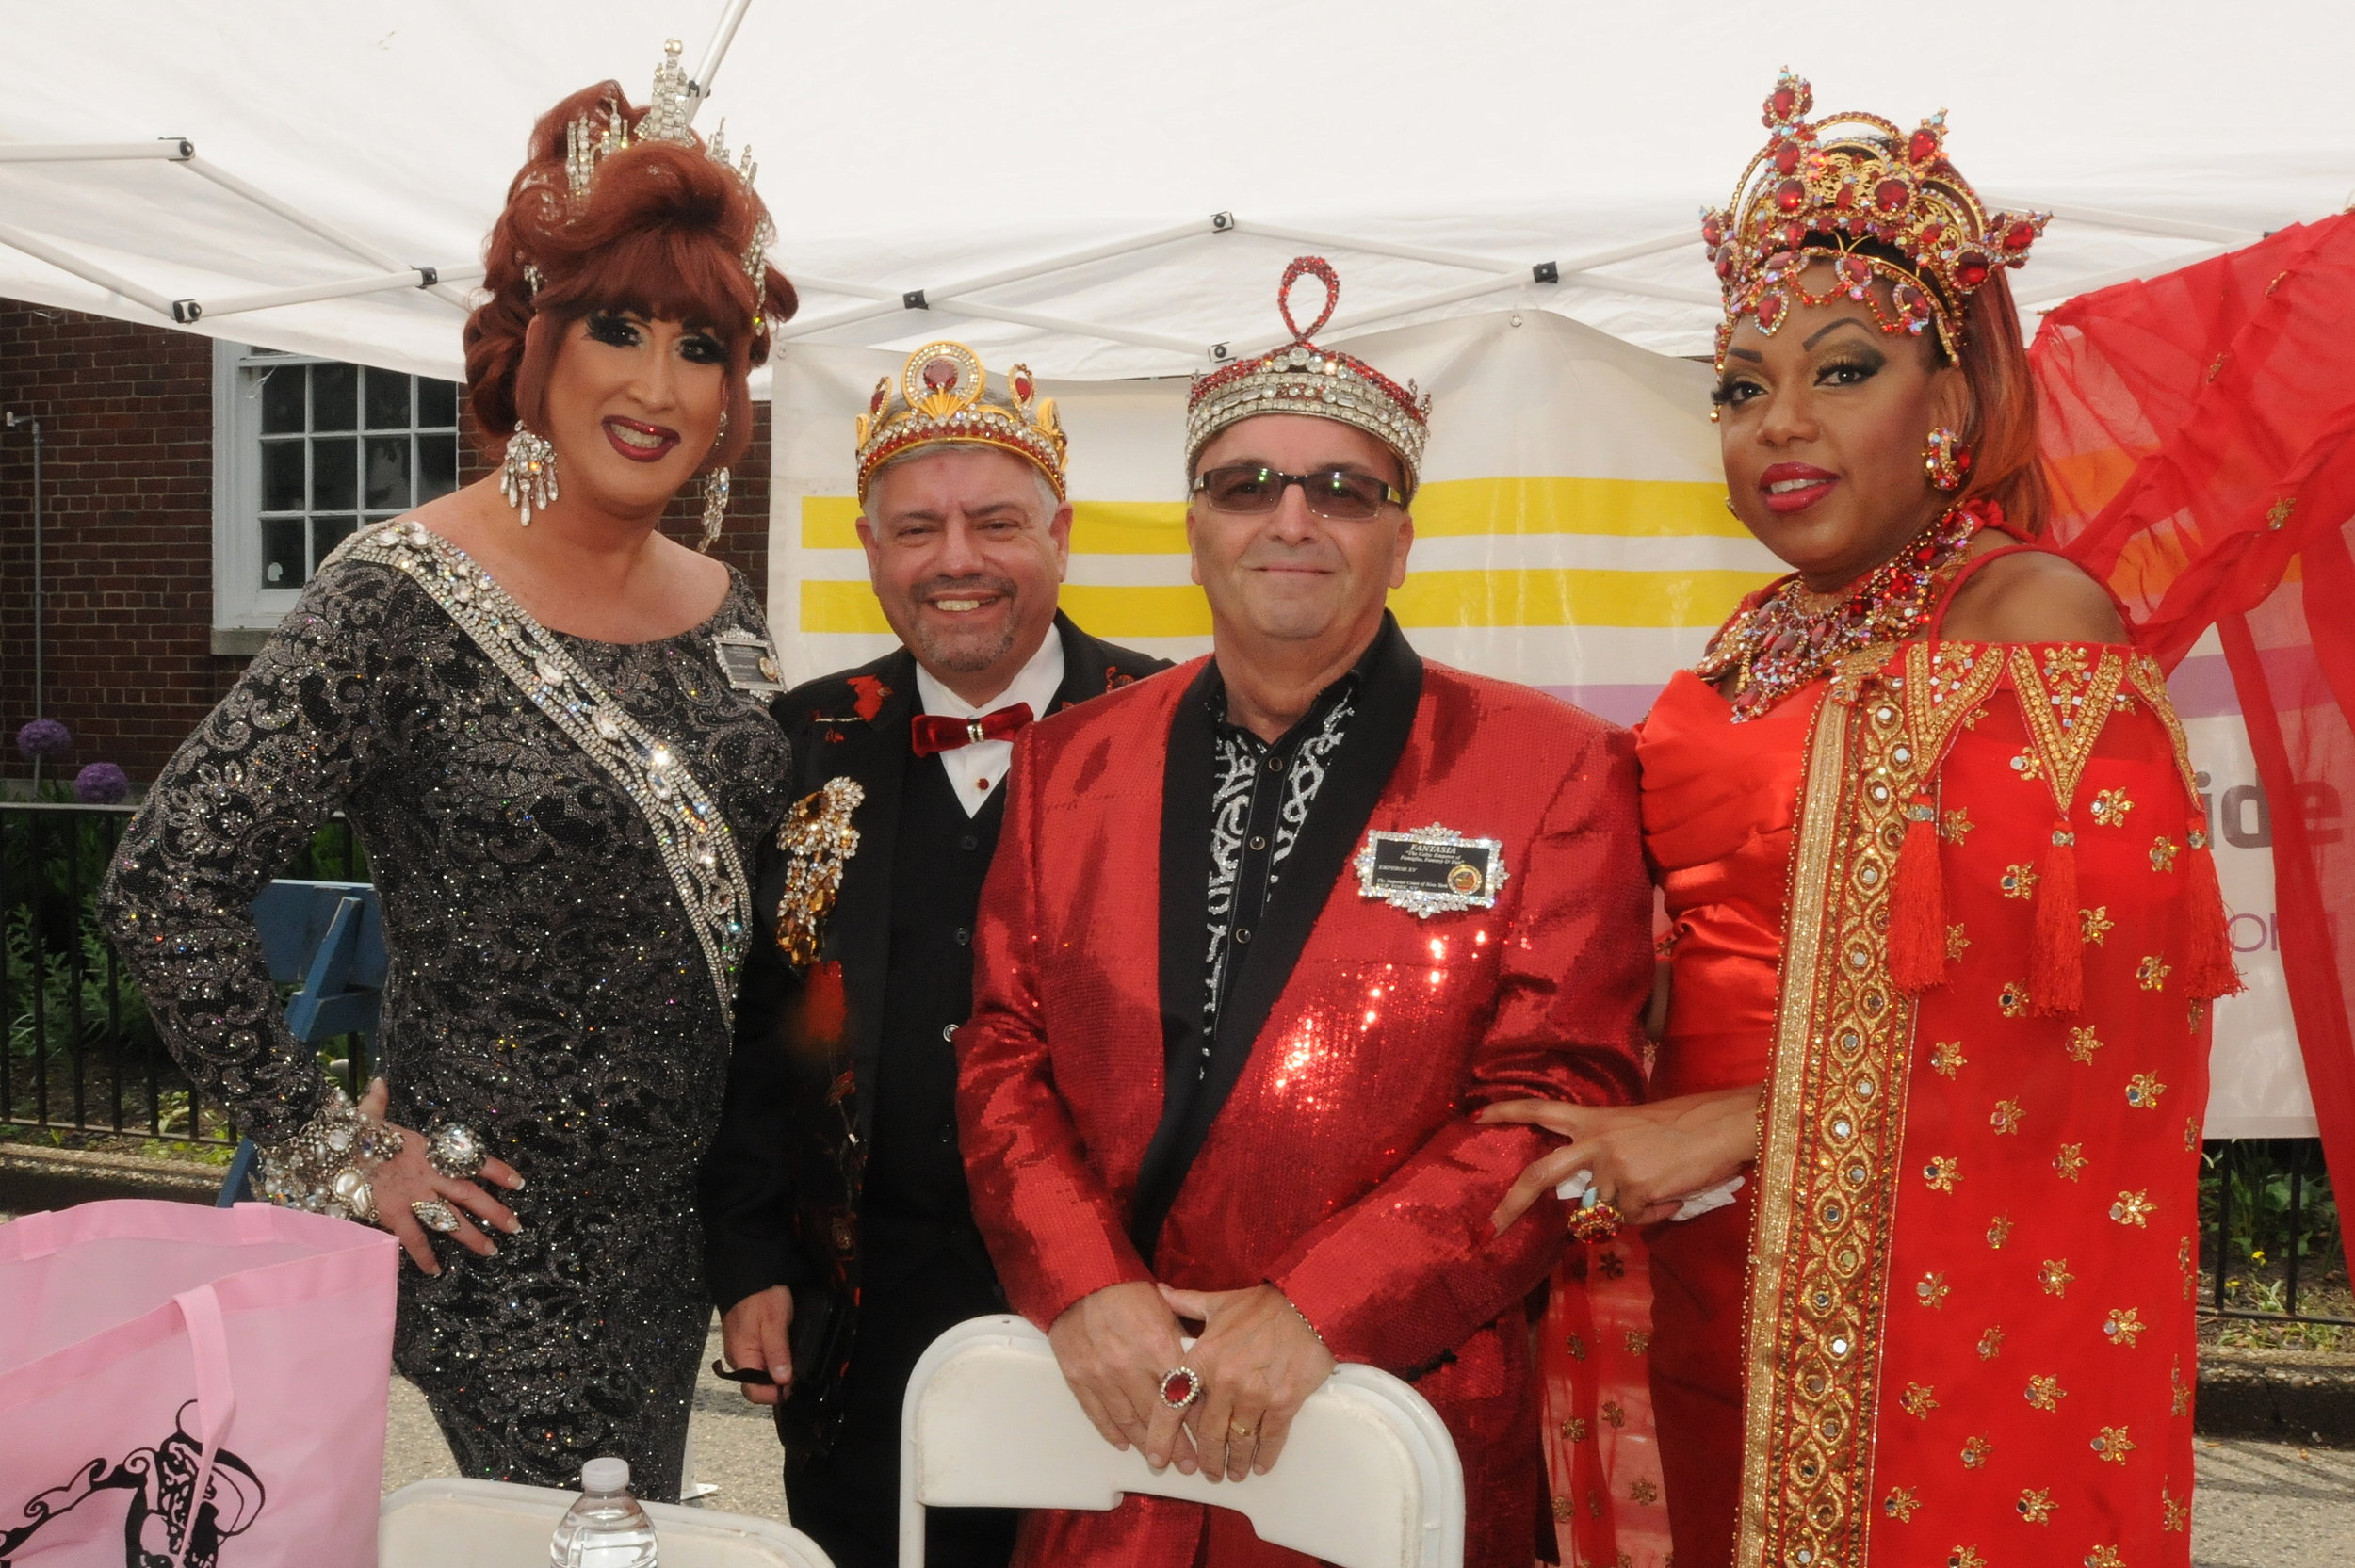  Pride "Royalty" observe the parade from the reviewing stand. From left to right, Empress Annetique &nbsp;Emperor Tony Monteleone, Emperor Fantasia and Empress Sugar B. Real.    